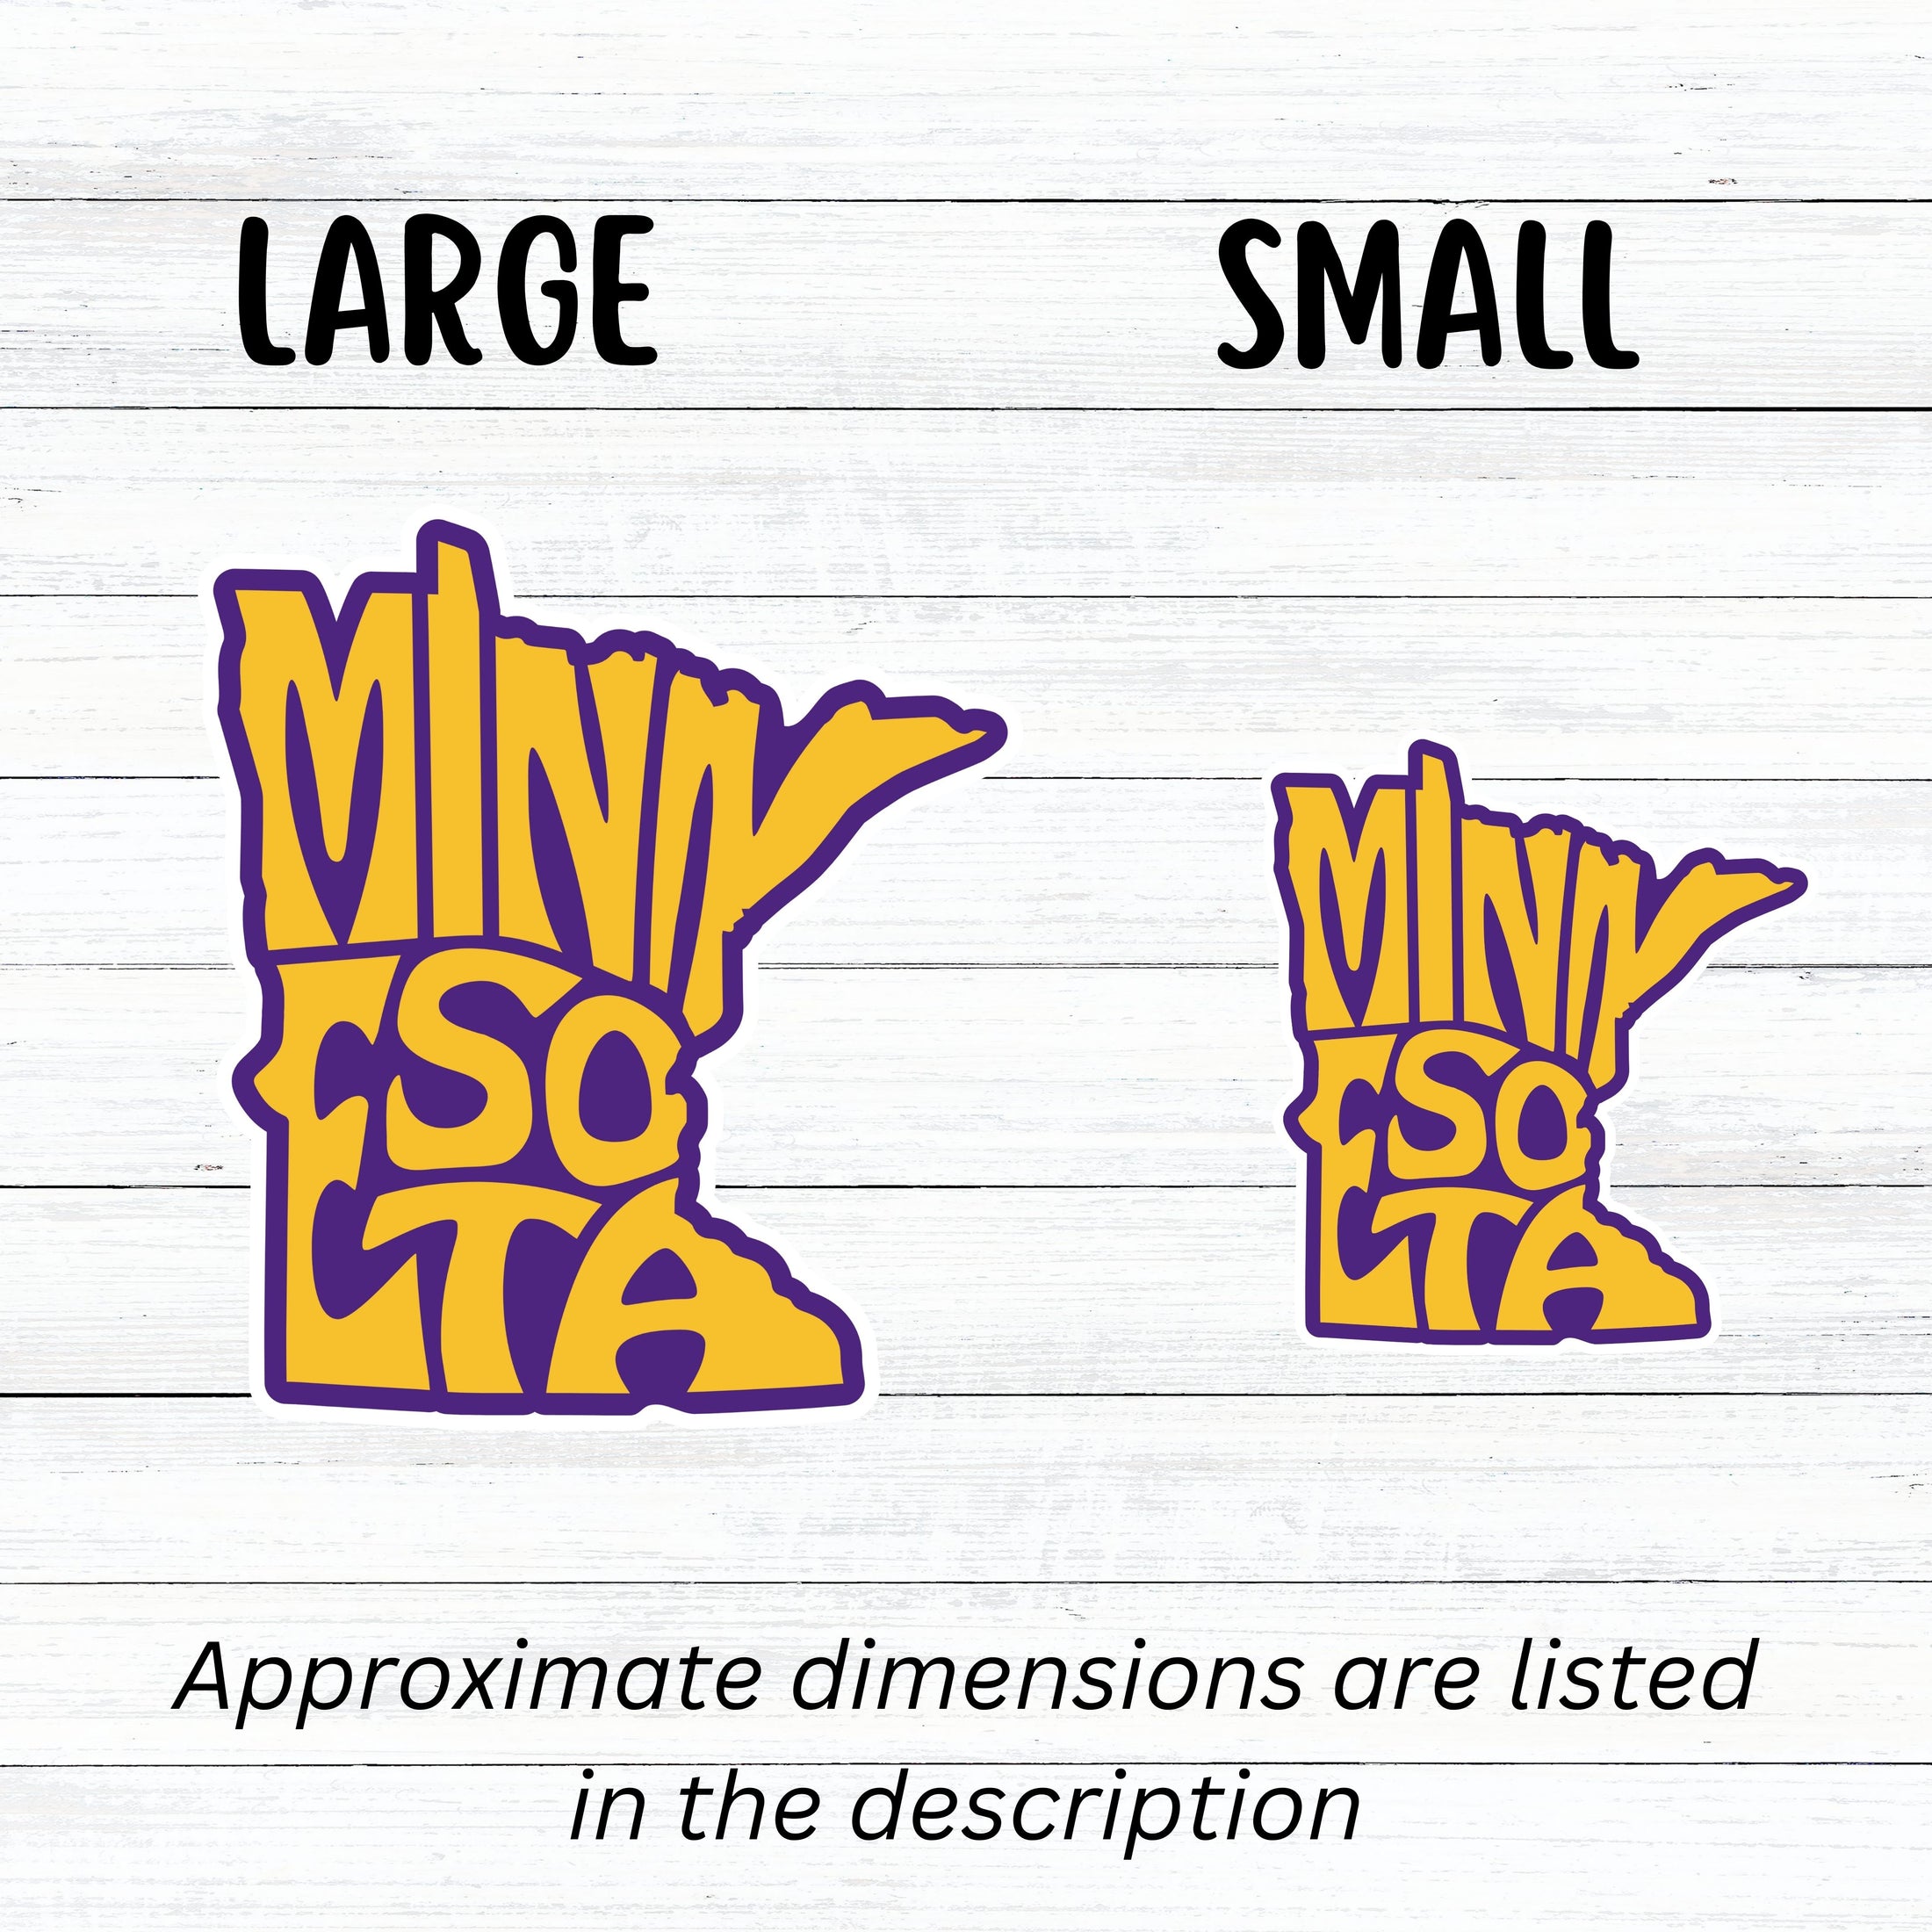 This image shows large and small MN purple and gold stickers next to each other.